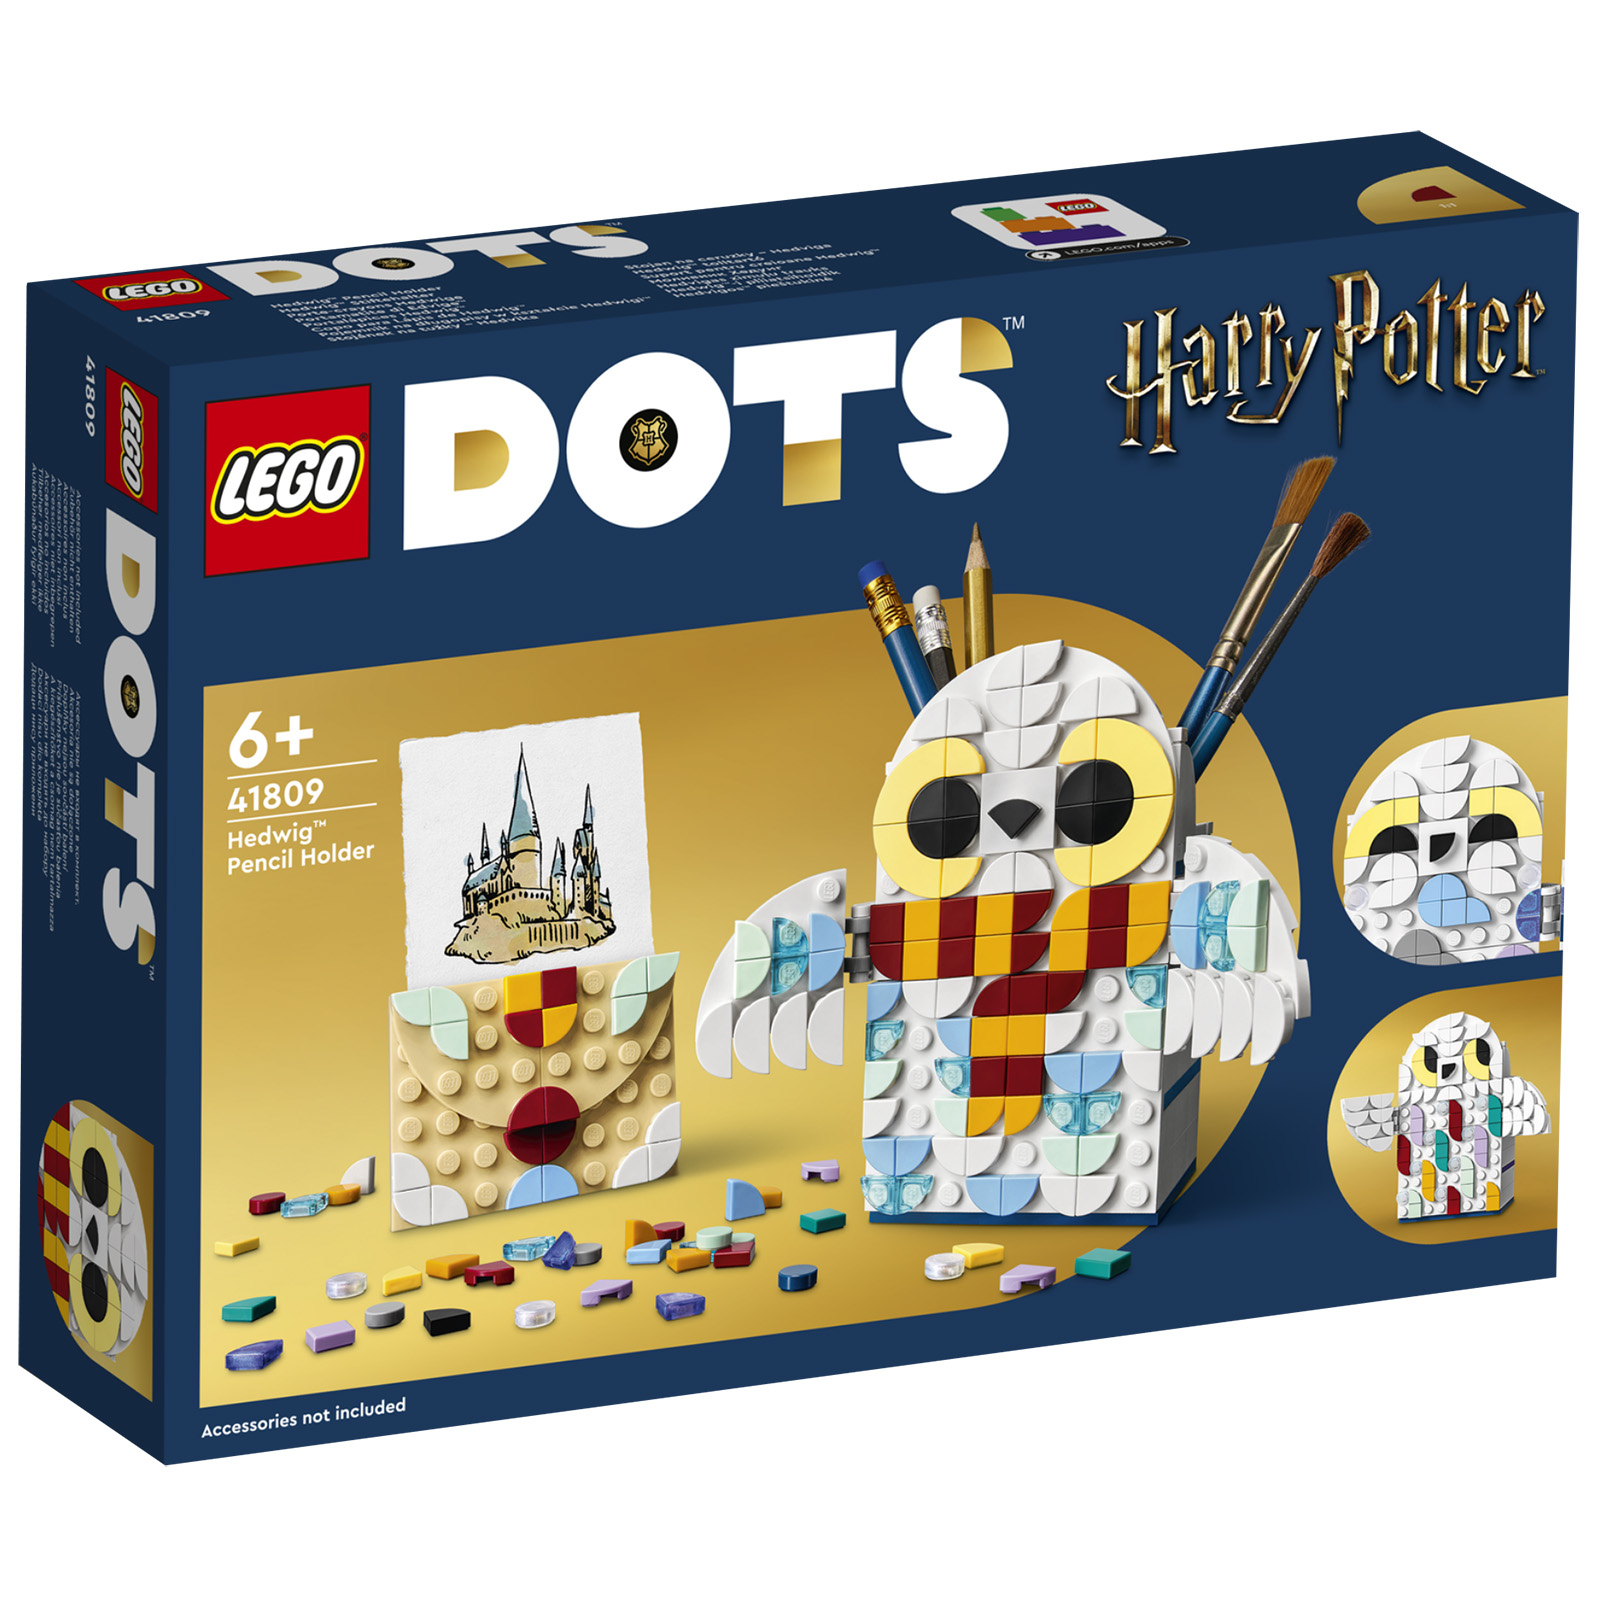 New LEGO DOTS 2023: 41809 Hedwig Pencil Holder